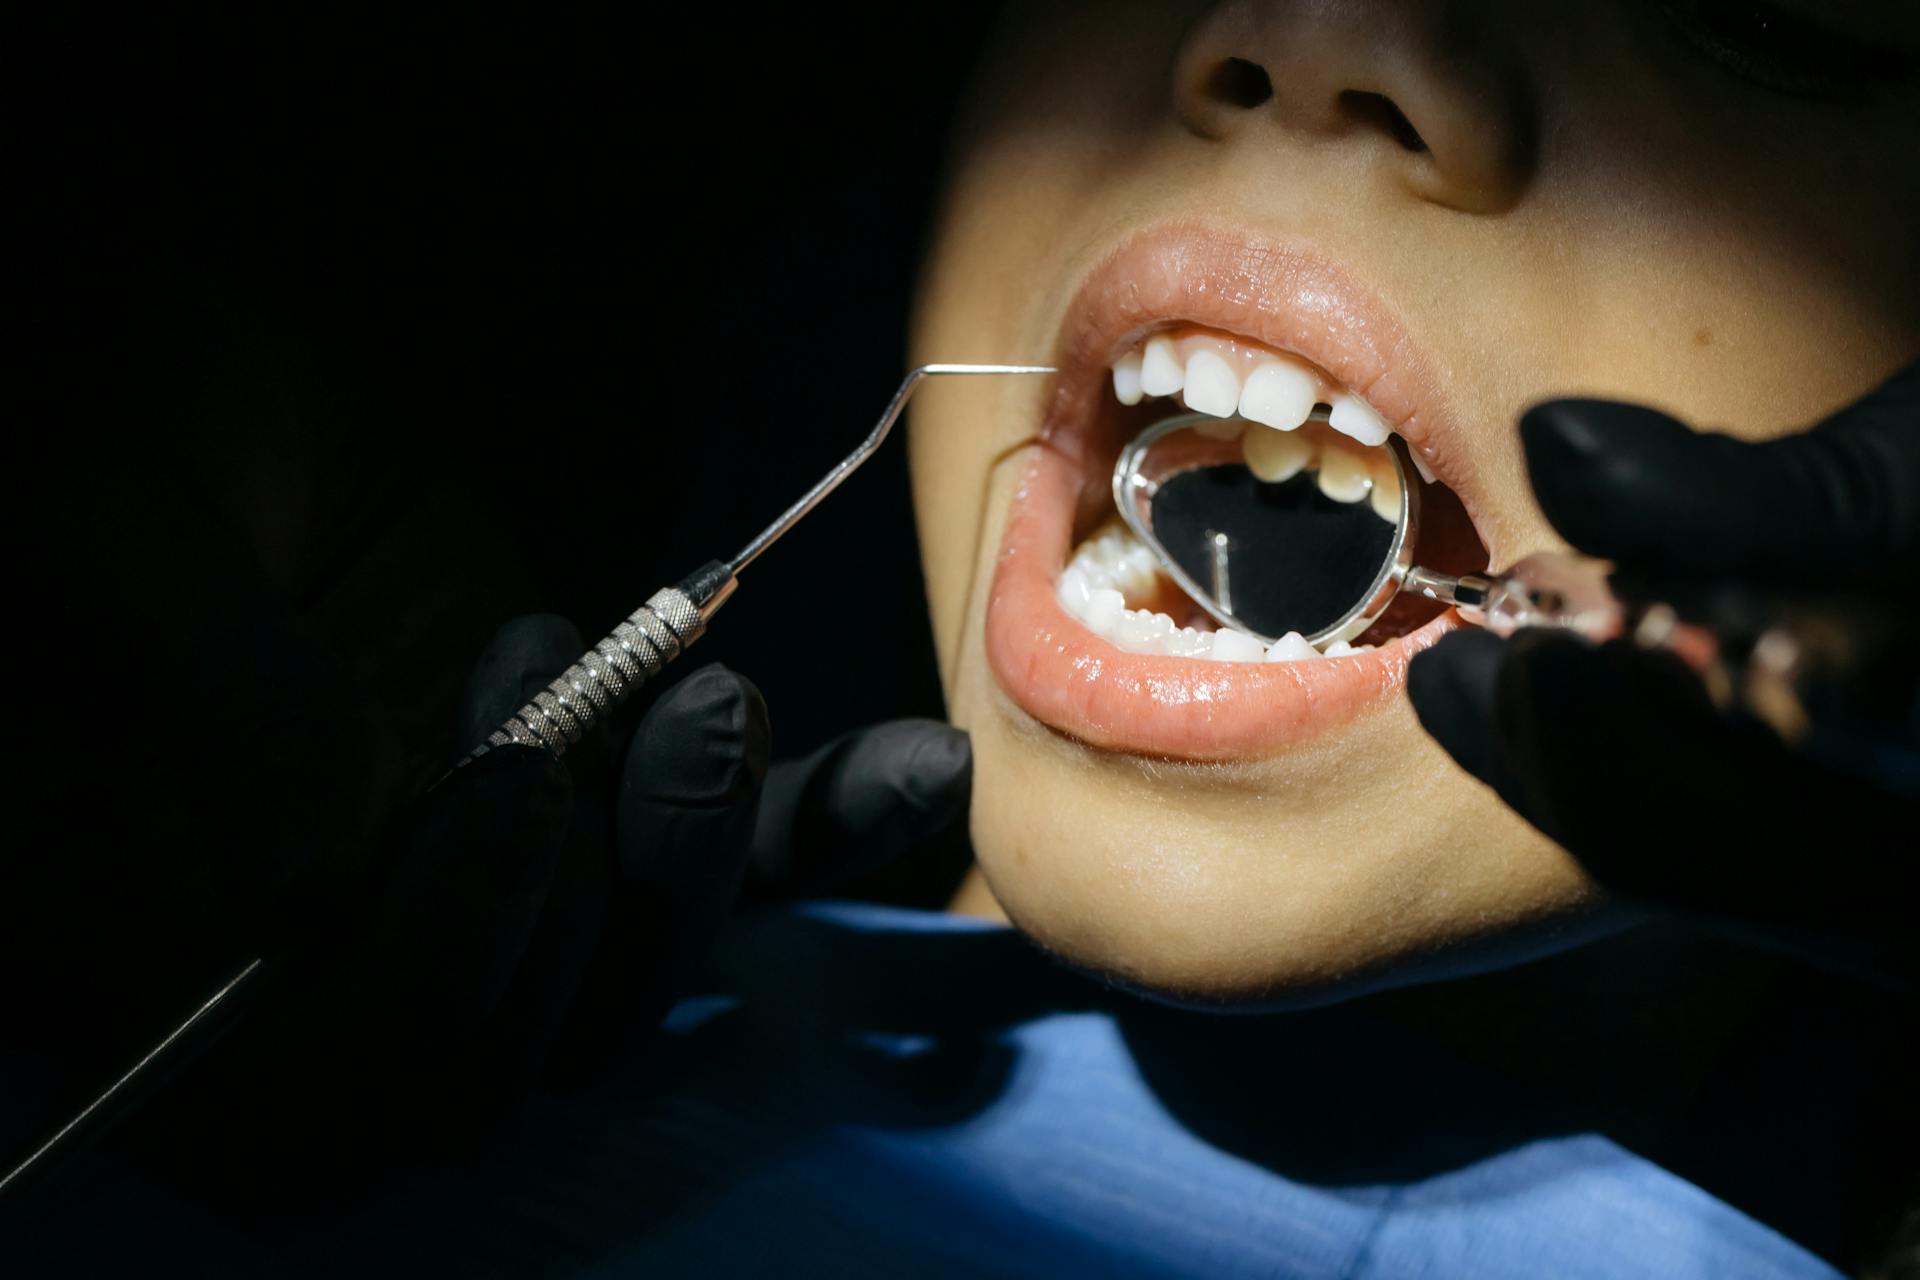 How Are Adolescent’s Stress Levels Impacted by Tooth Extractions?